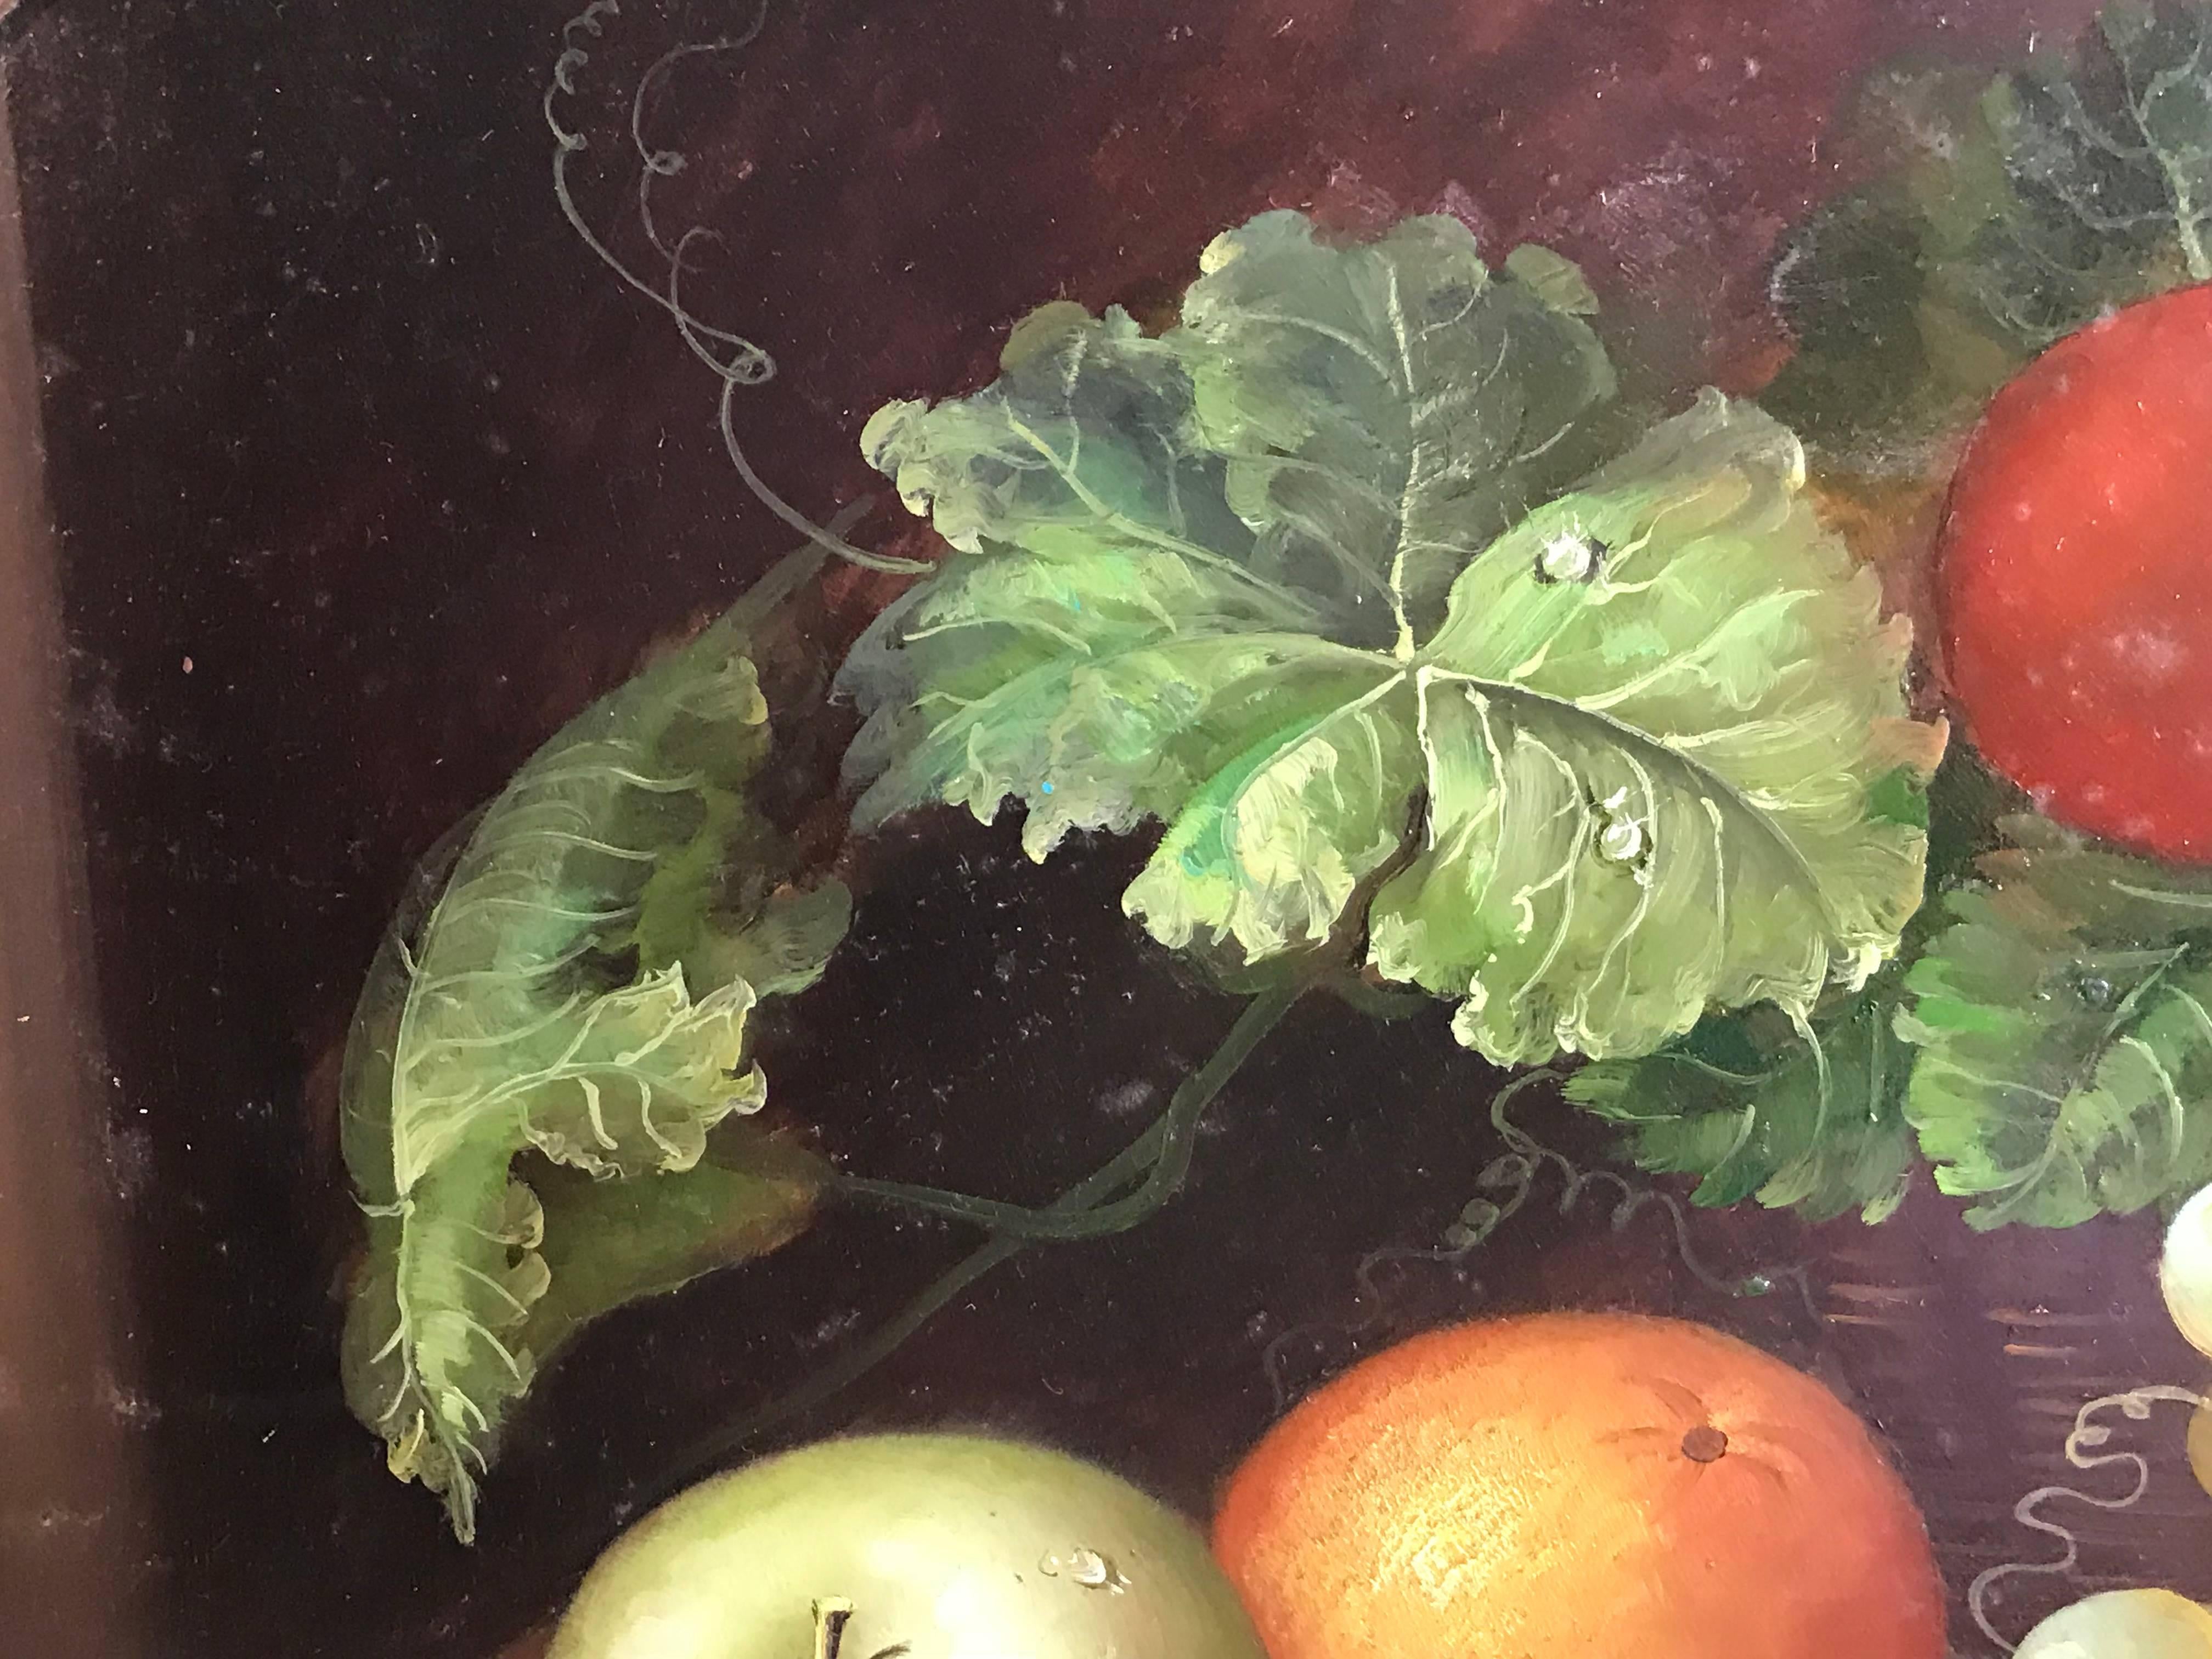 Late Summer Fruits
by W. Jenkins, late 20th century
signed oil painting on board, framed
framed size: 19 x 23 inches

Finely painted ornate study of early autumnal fruits on a marble ledge. Beautifully painted with crisp, intricate detailing.